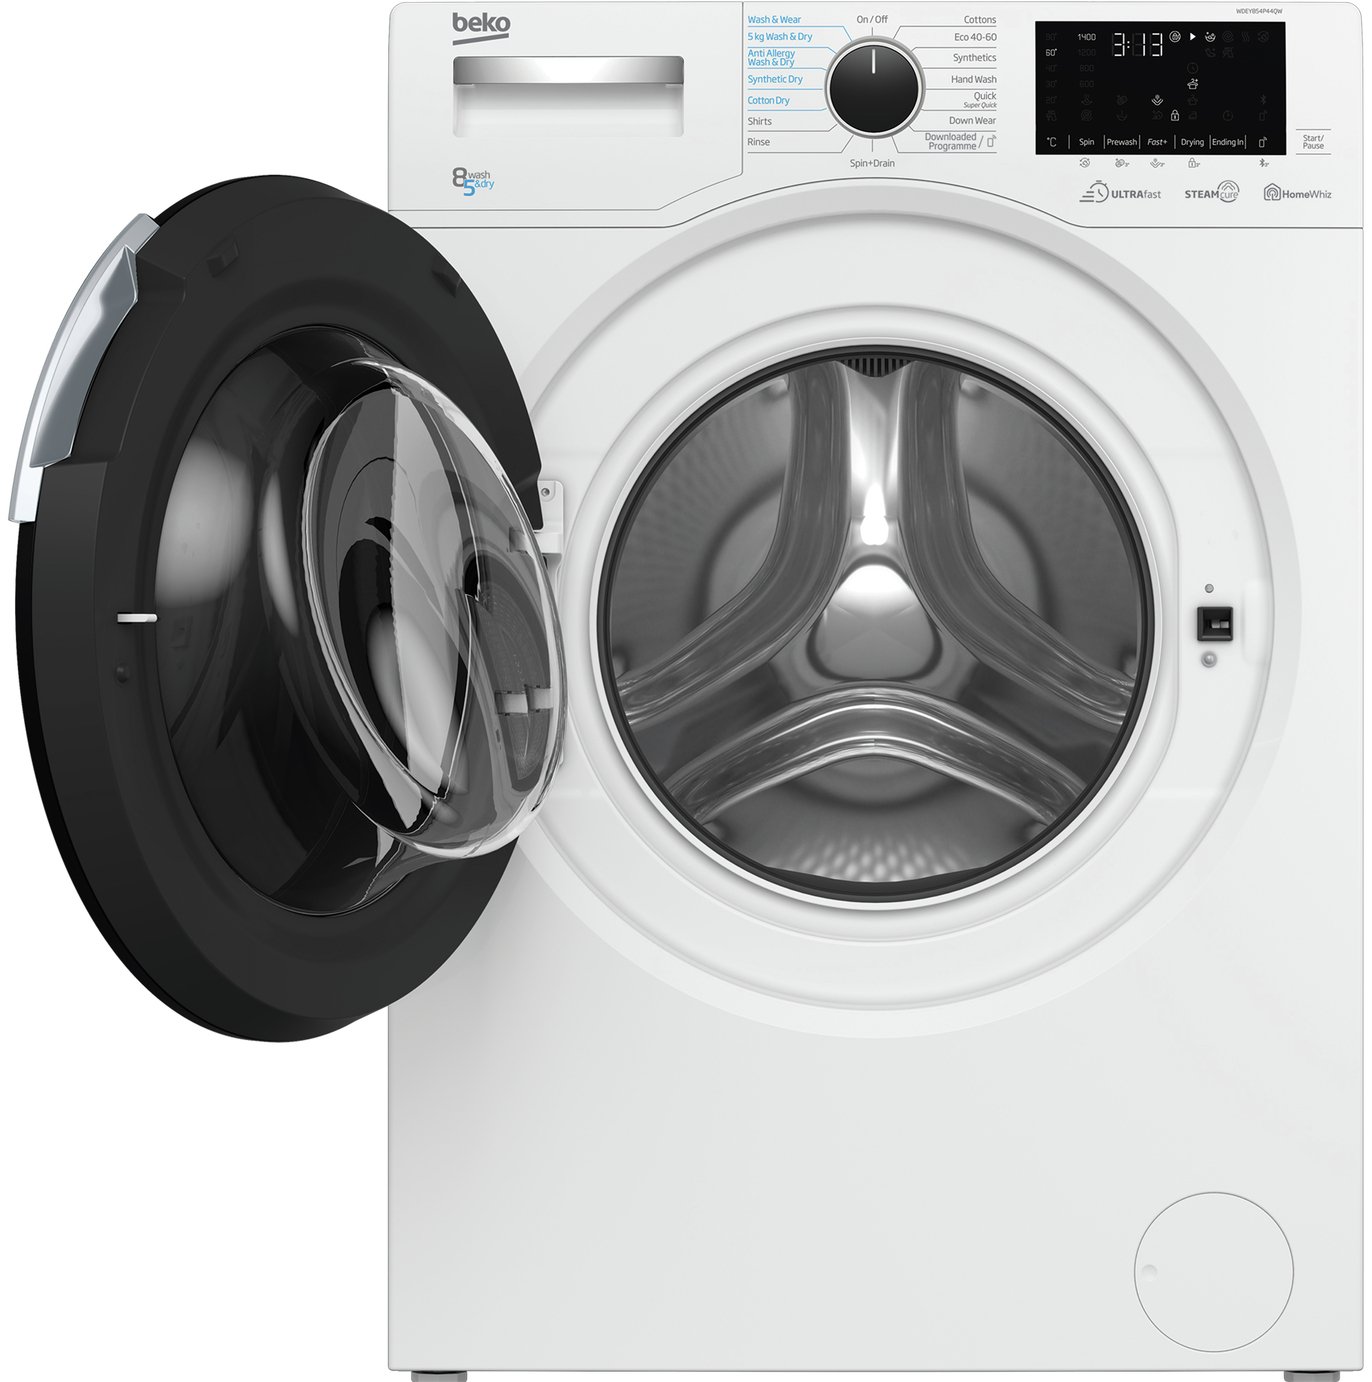 Beko WDEY854P44QW 8KG / 5KG 1400 Spin Washer Dryer Review